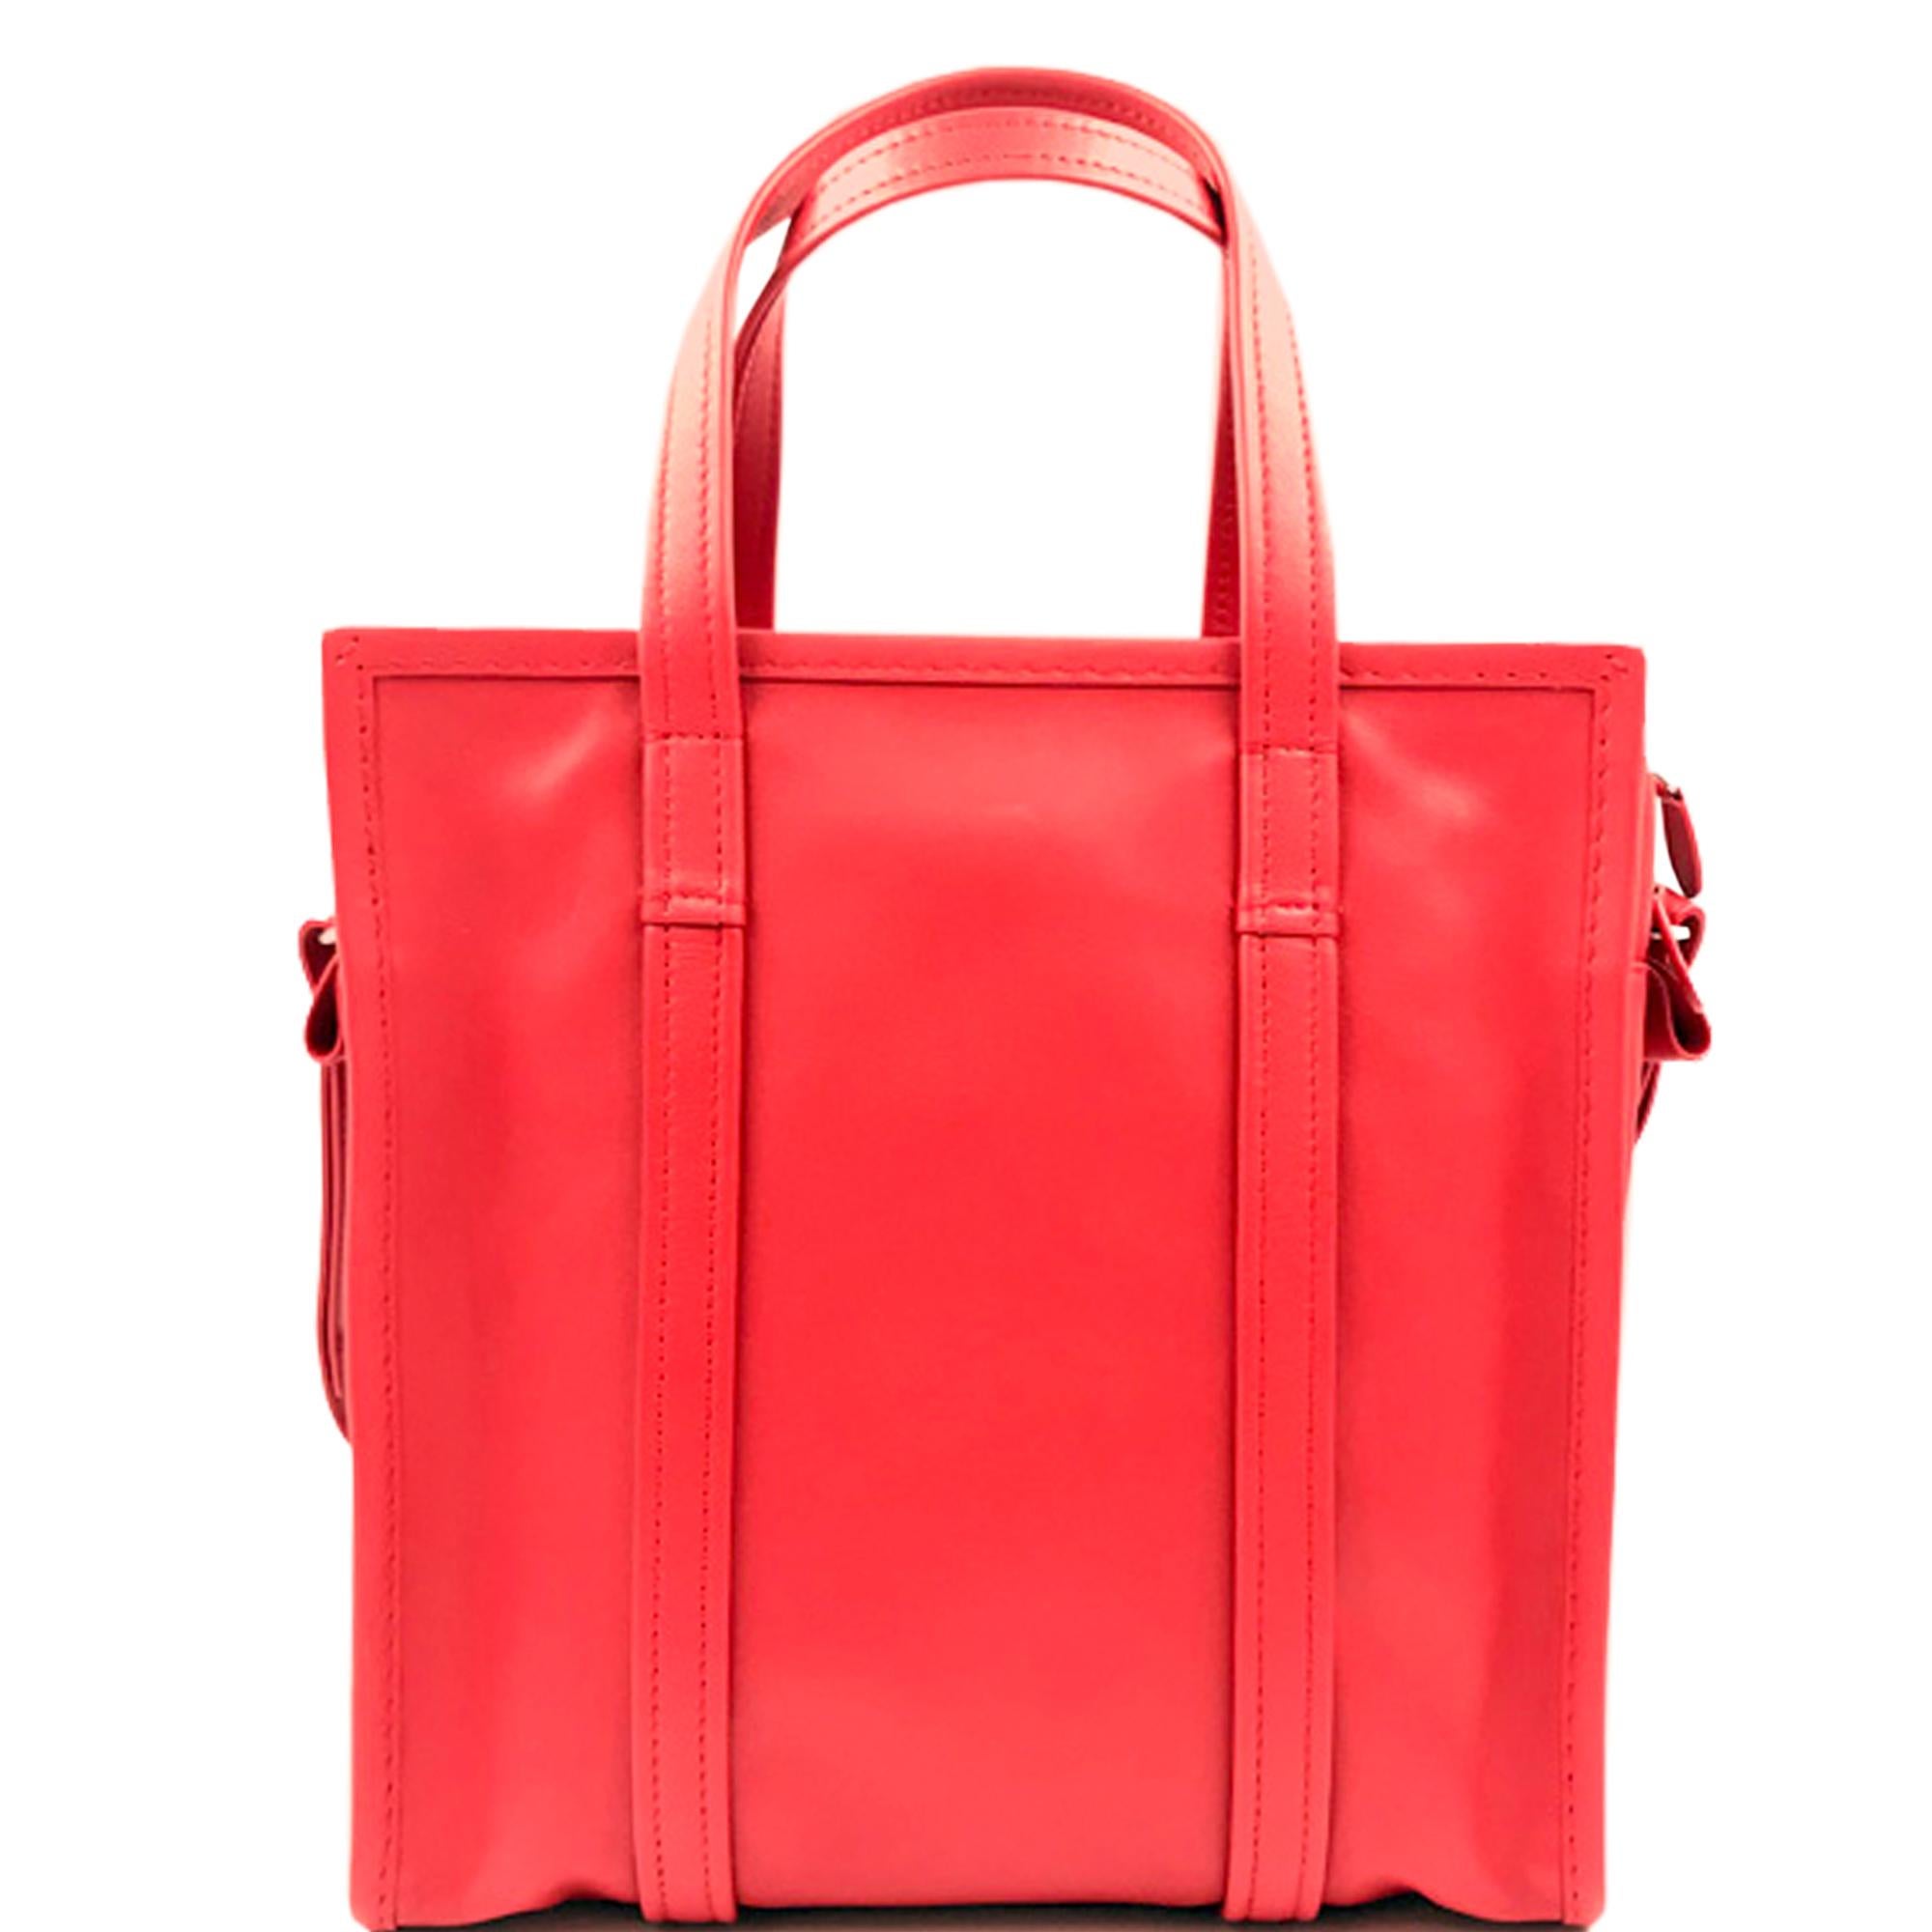 Balenciaga's coveted Bazar shopper arrives in red and an S size. It's made in Italy from naturally creased leather with a detachable shoulder strap, silver-tone metal hardware and opens to reveal an internal slip pocket and four card holders. Carry